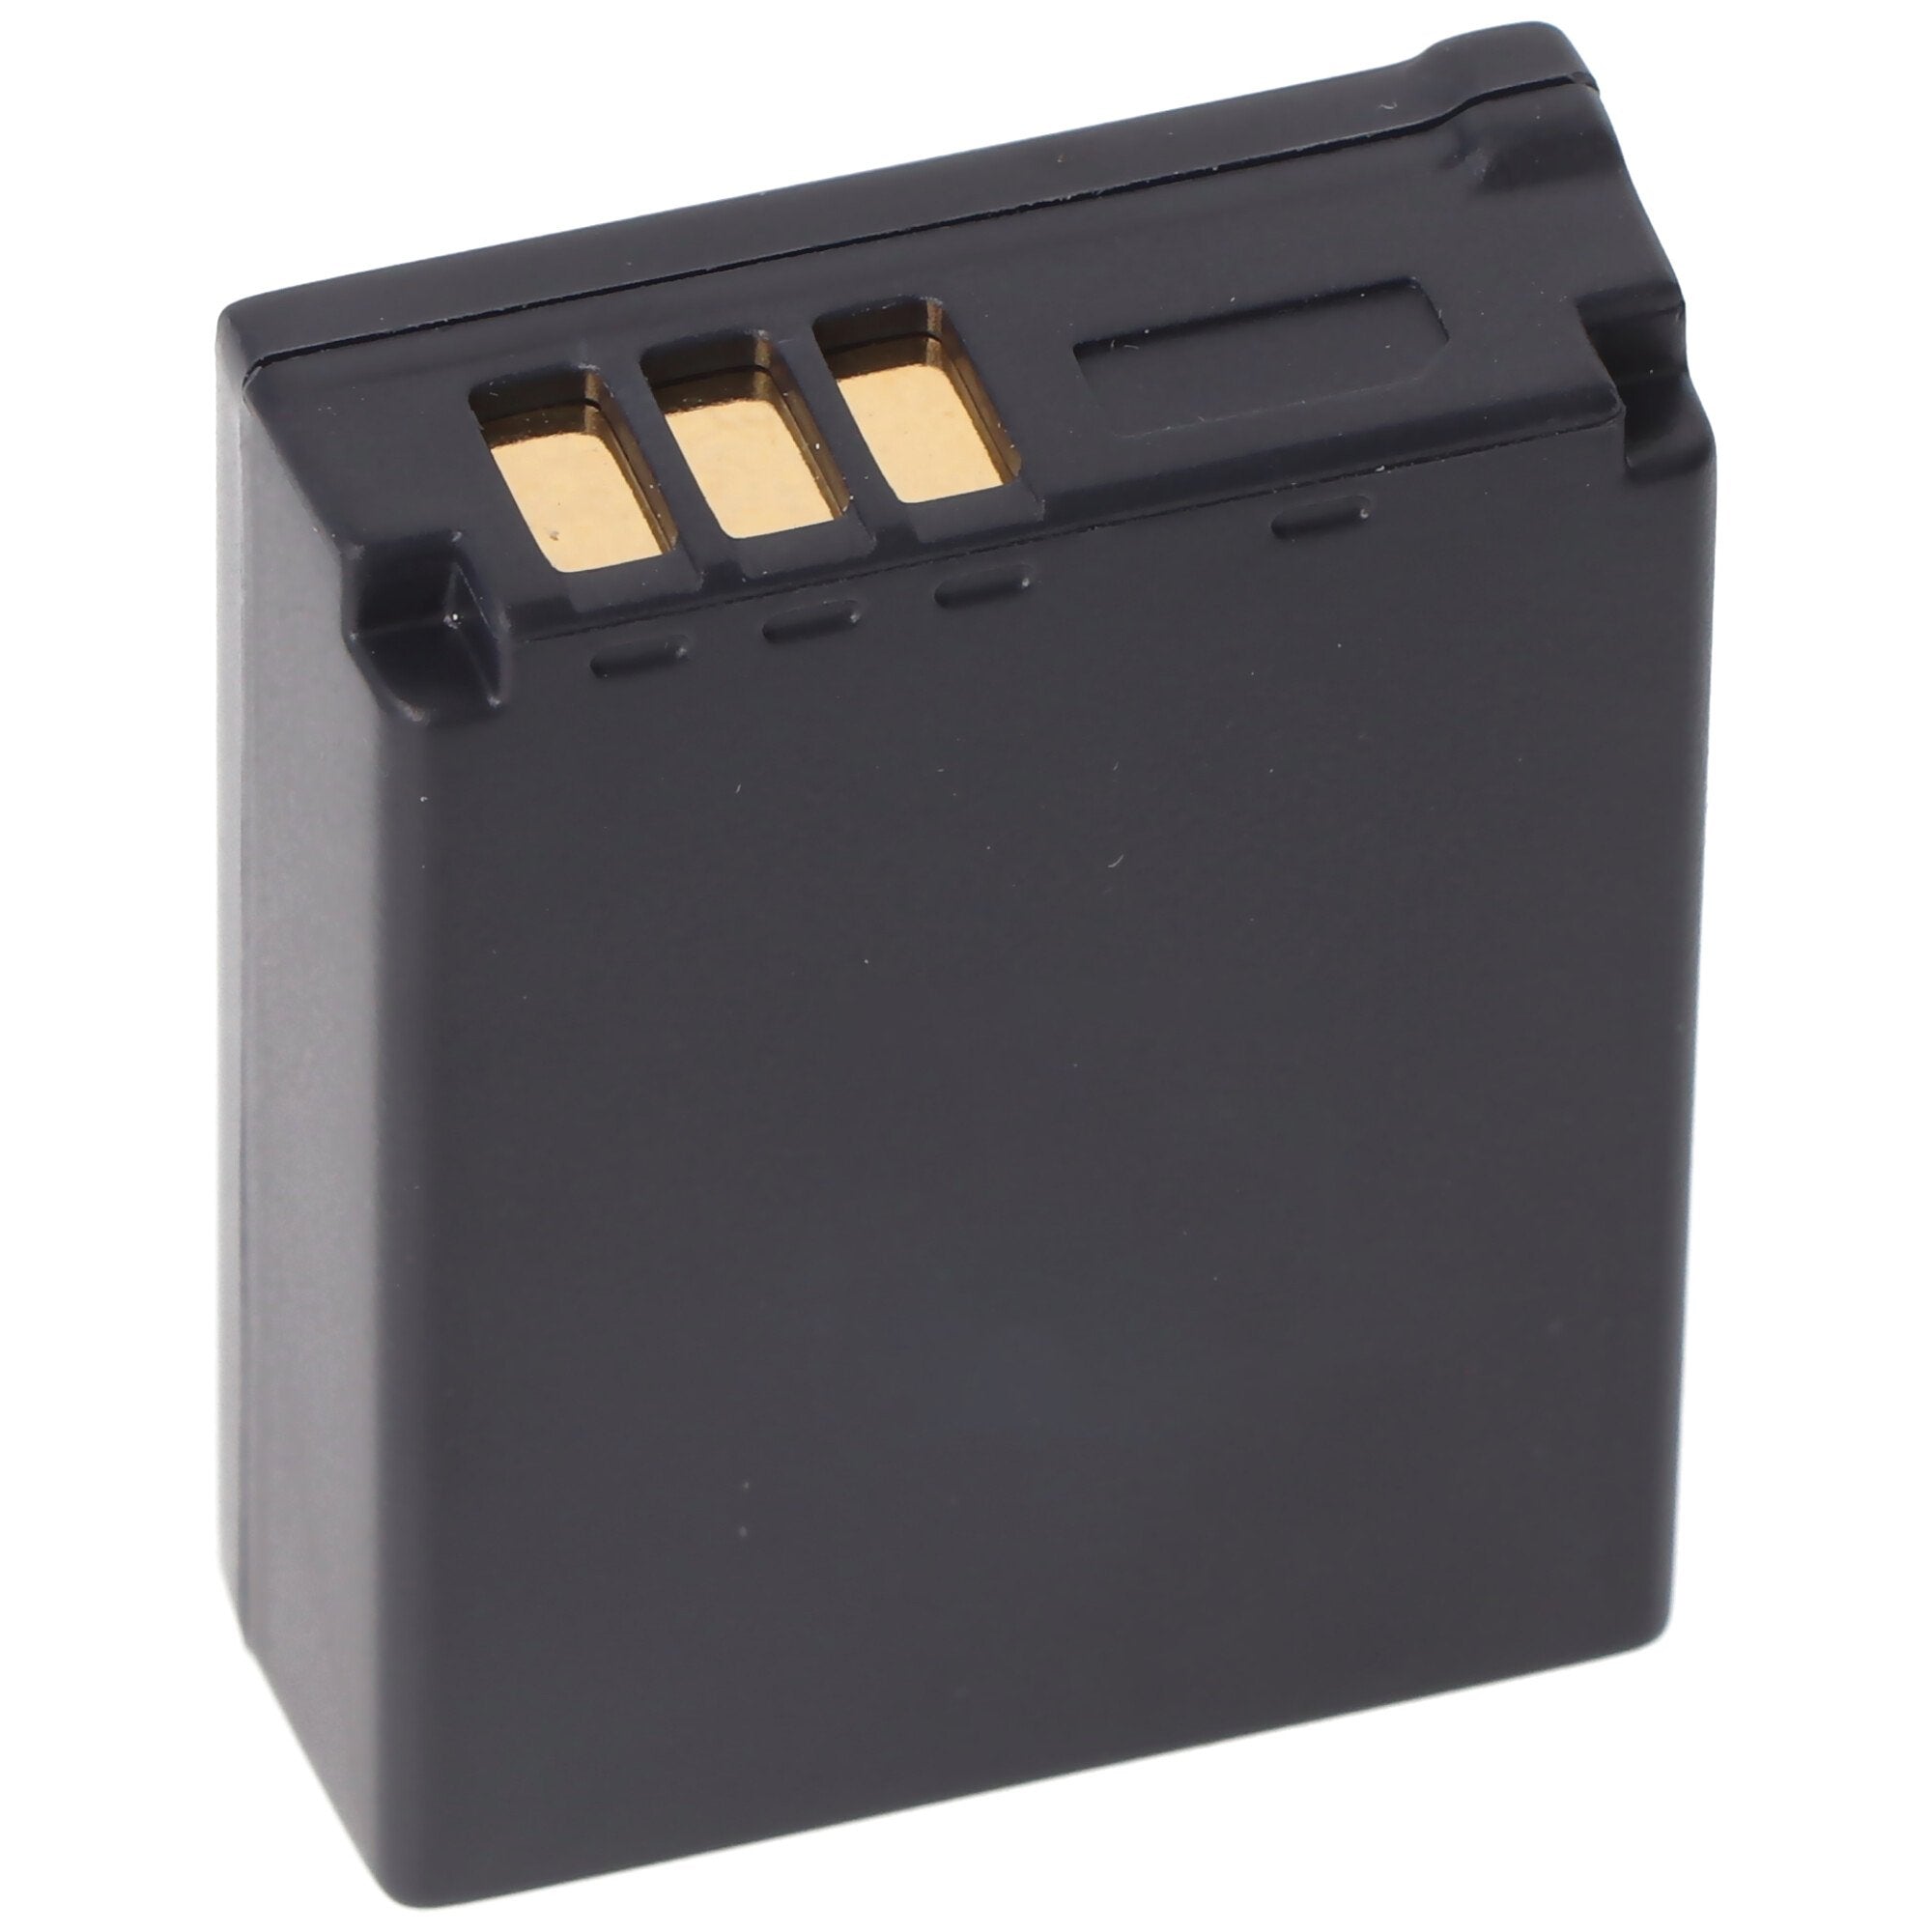 AccuCell battery suitable for Panasonic CGA-S007, CGR-S007, DMW-BCD10